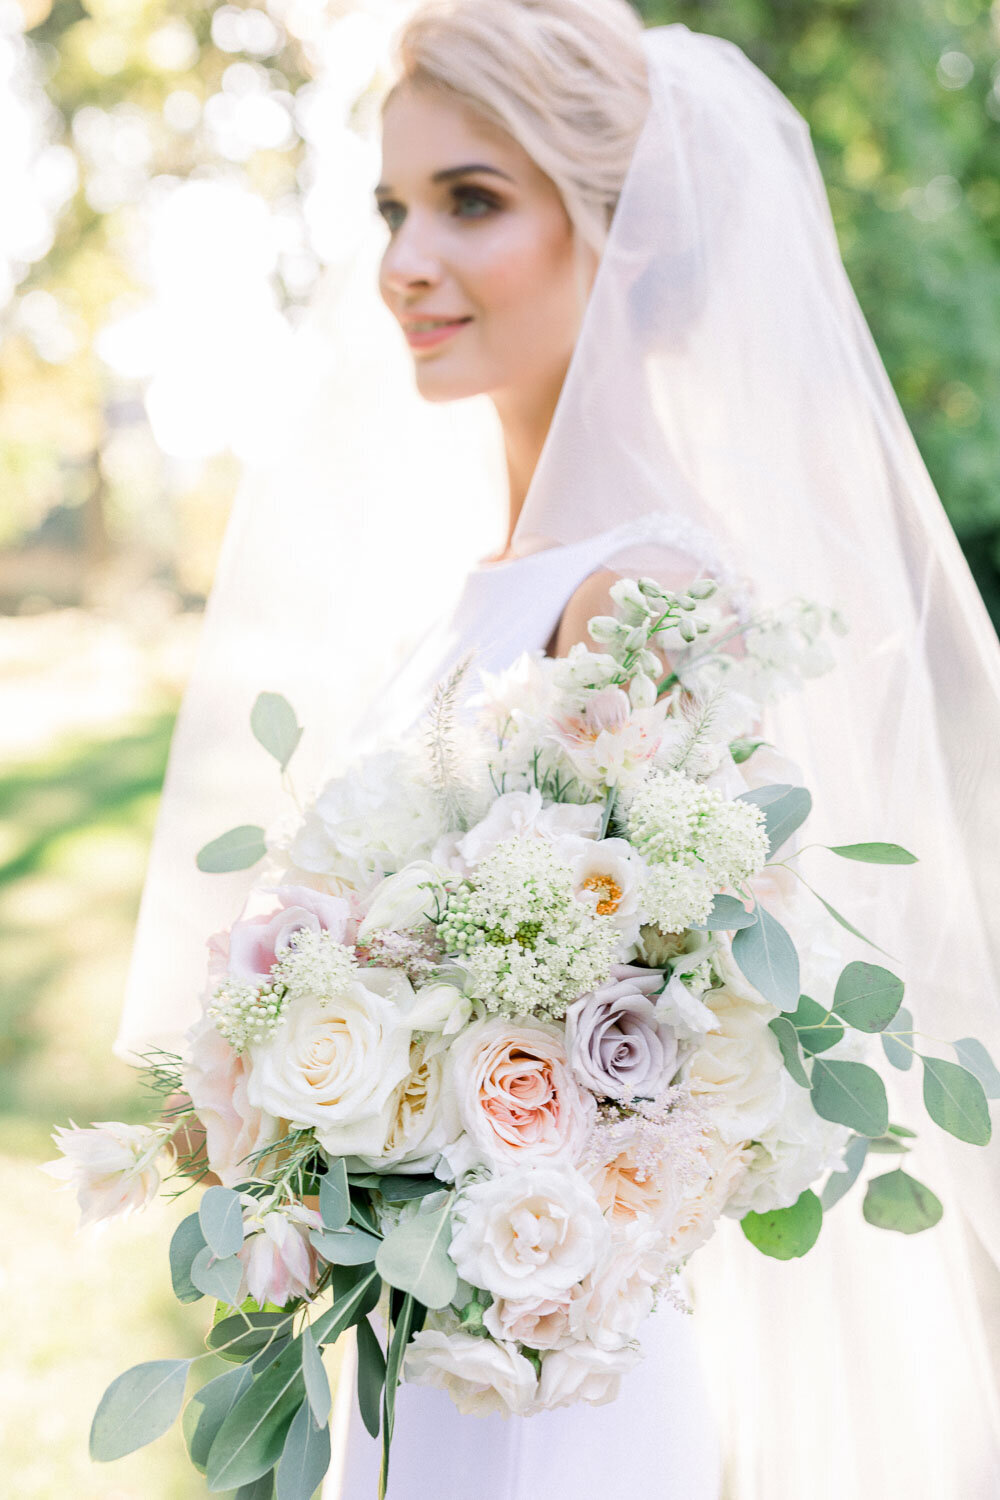 Stunning wedding bouquet from style me pretty